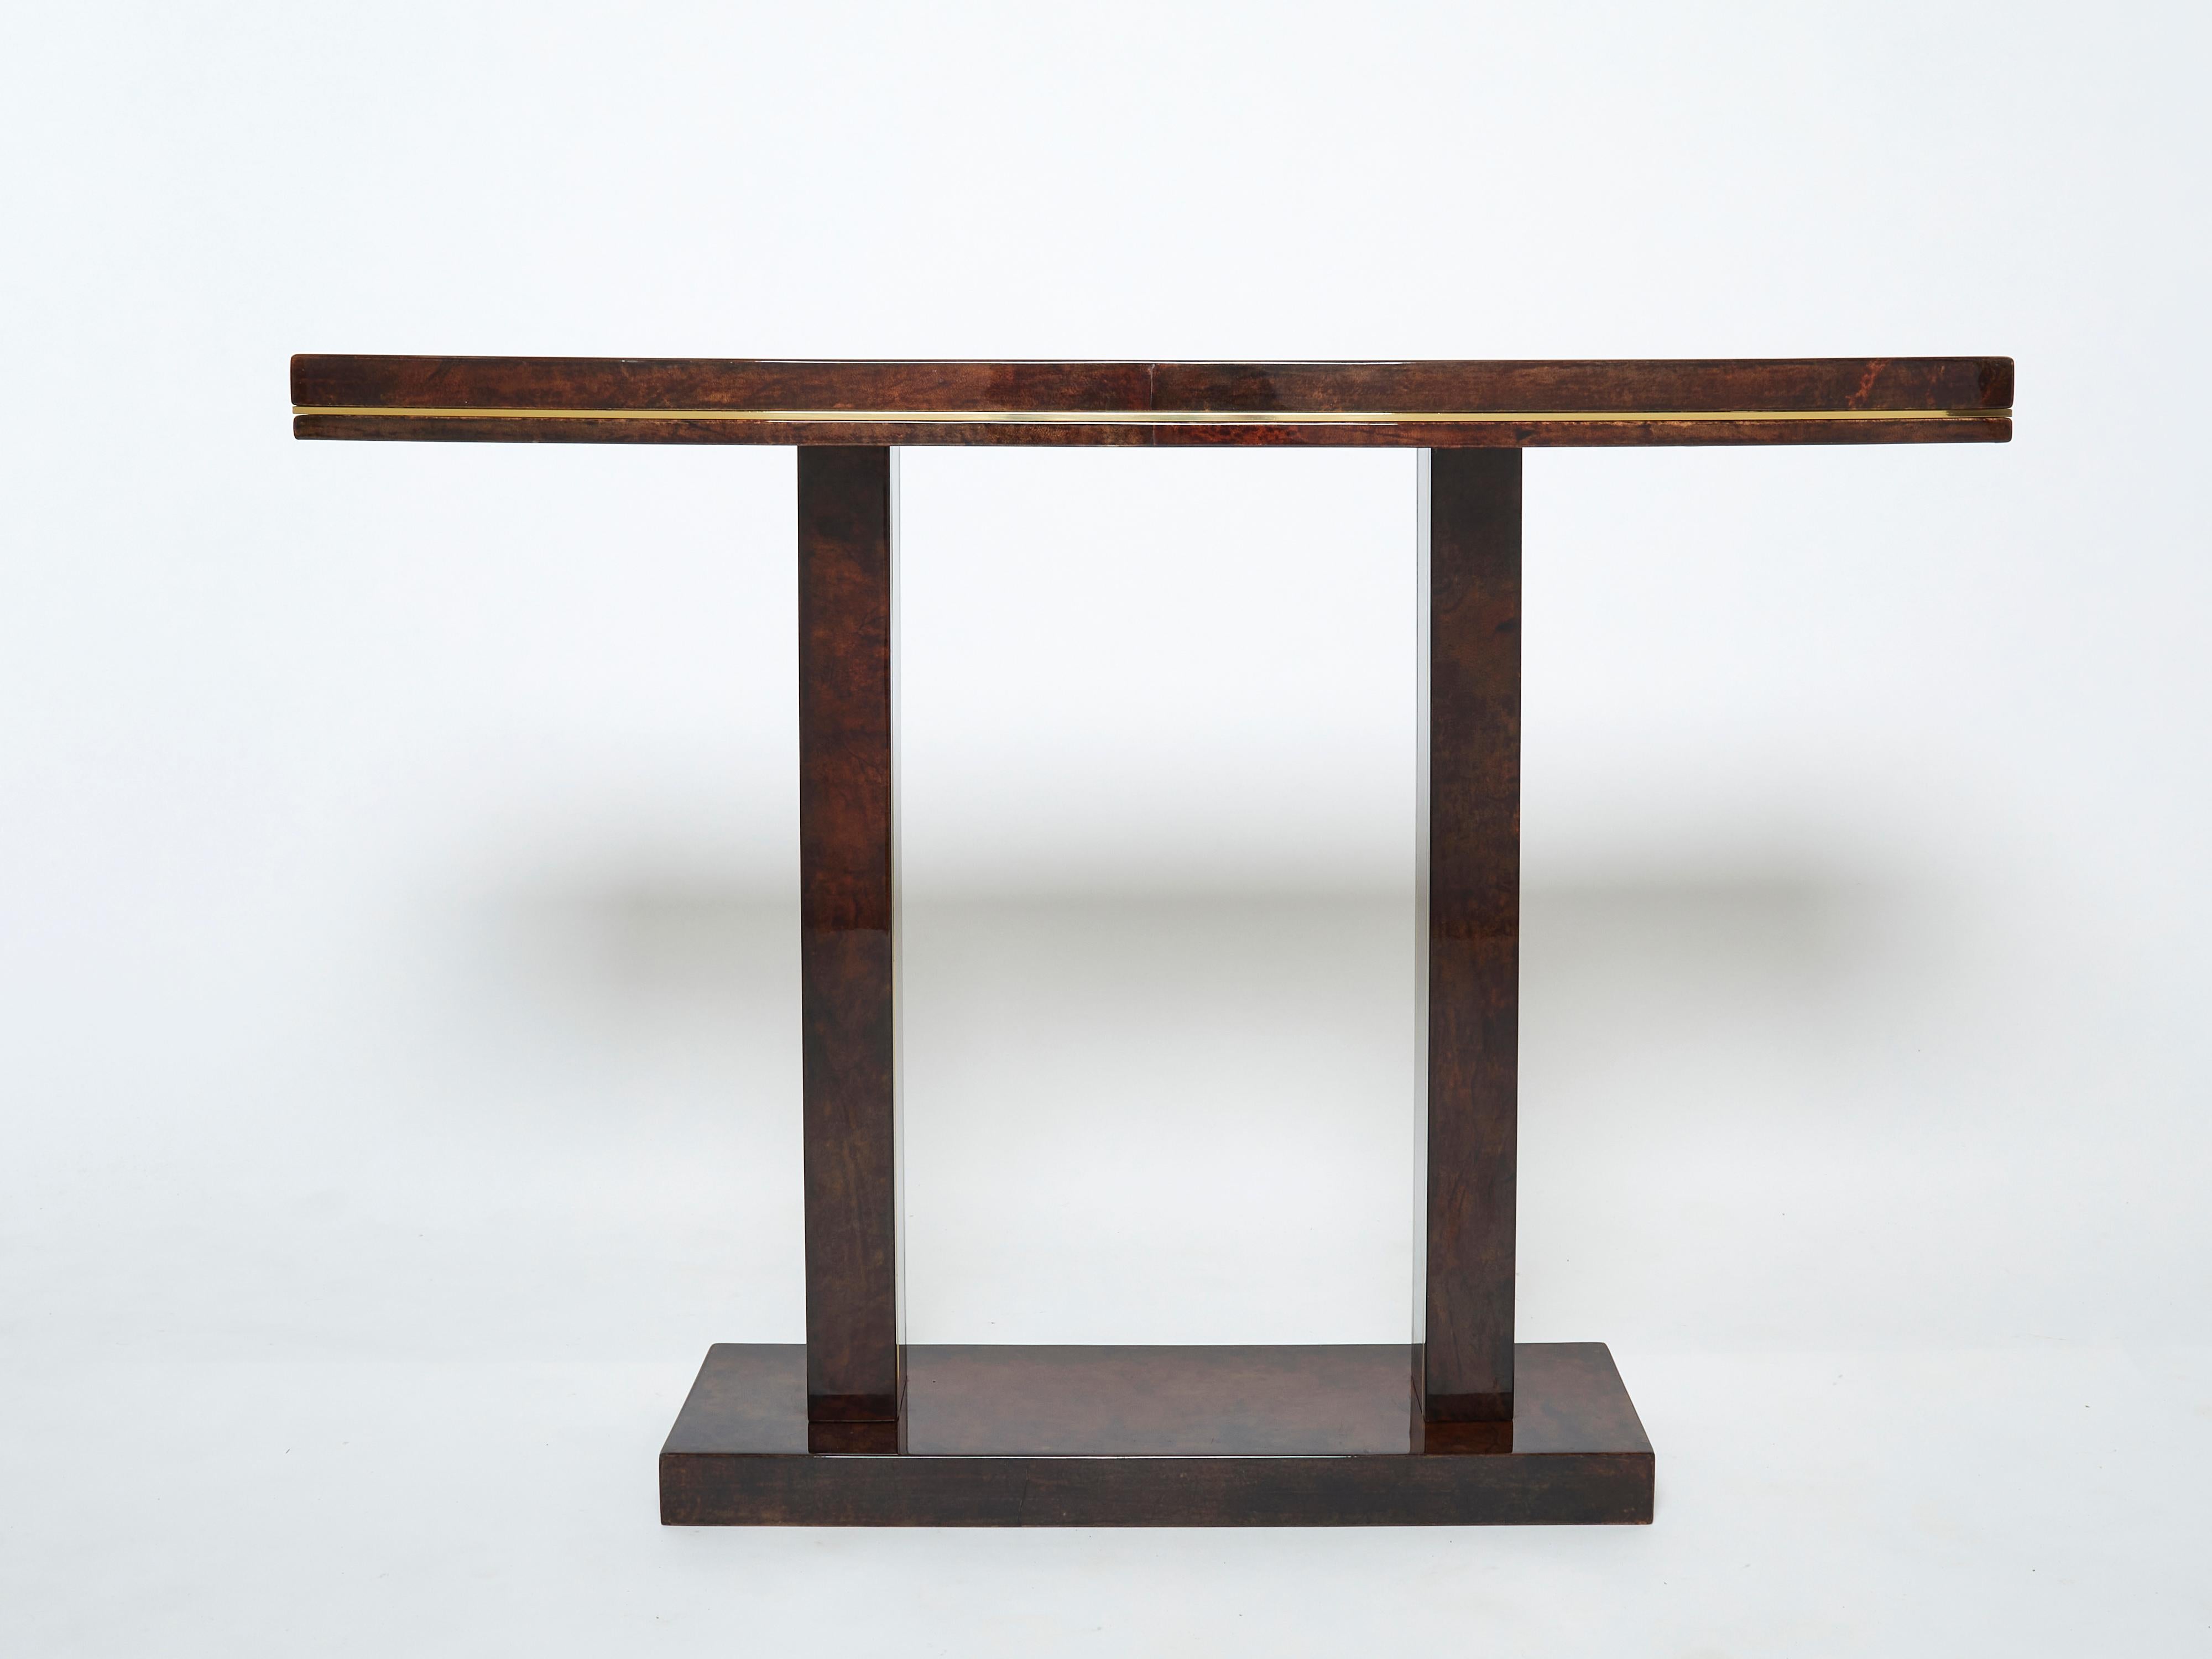 The varnished goatskin parchment, in rich shades of brown, makes this console table typical of designer Aldo Tura. This beautiful console table would make a fascinating piece for an entrance or a living room. It’s been beautifully finished for a